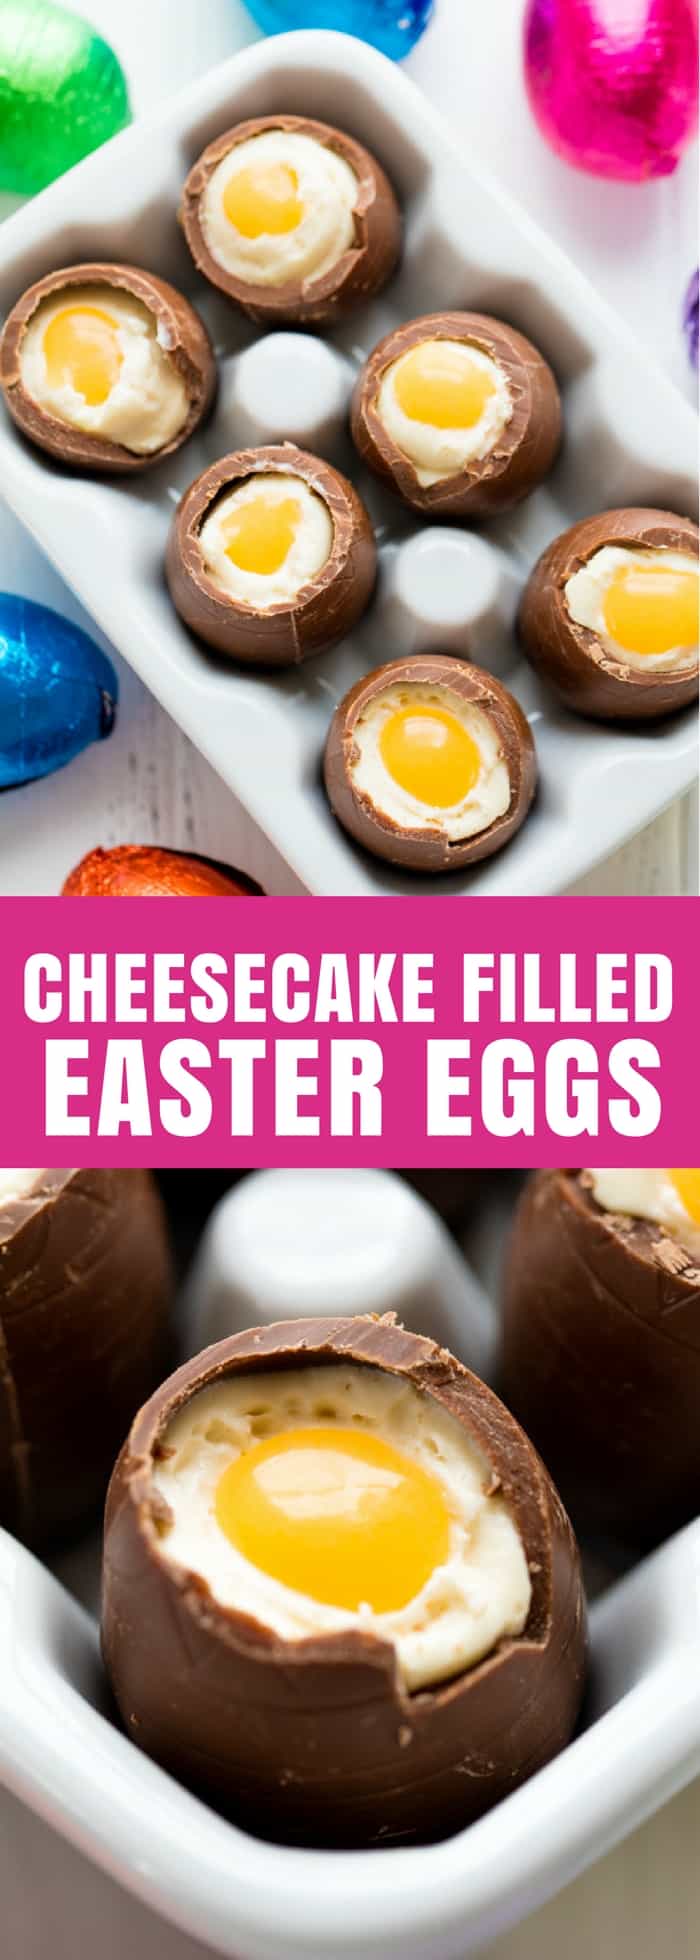 These Cheesecake Filled Easter Eggs are a fun Easter treat that are easy to make! They look just like an egg!